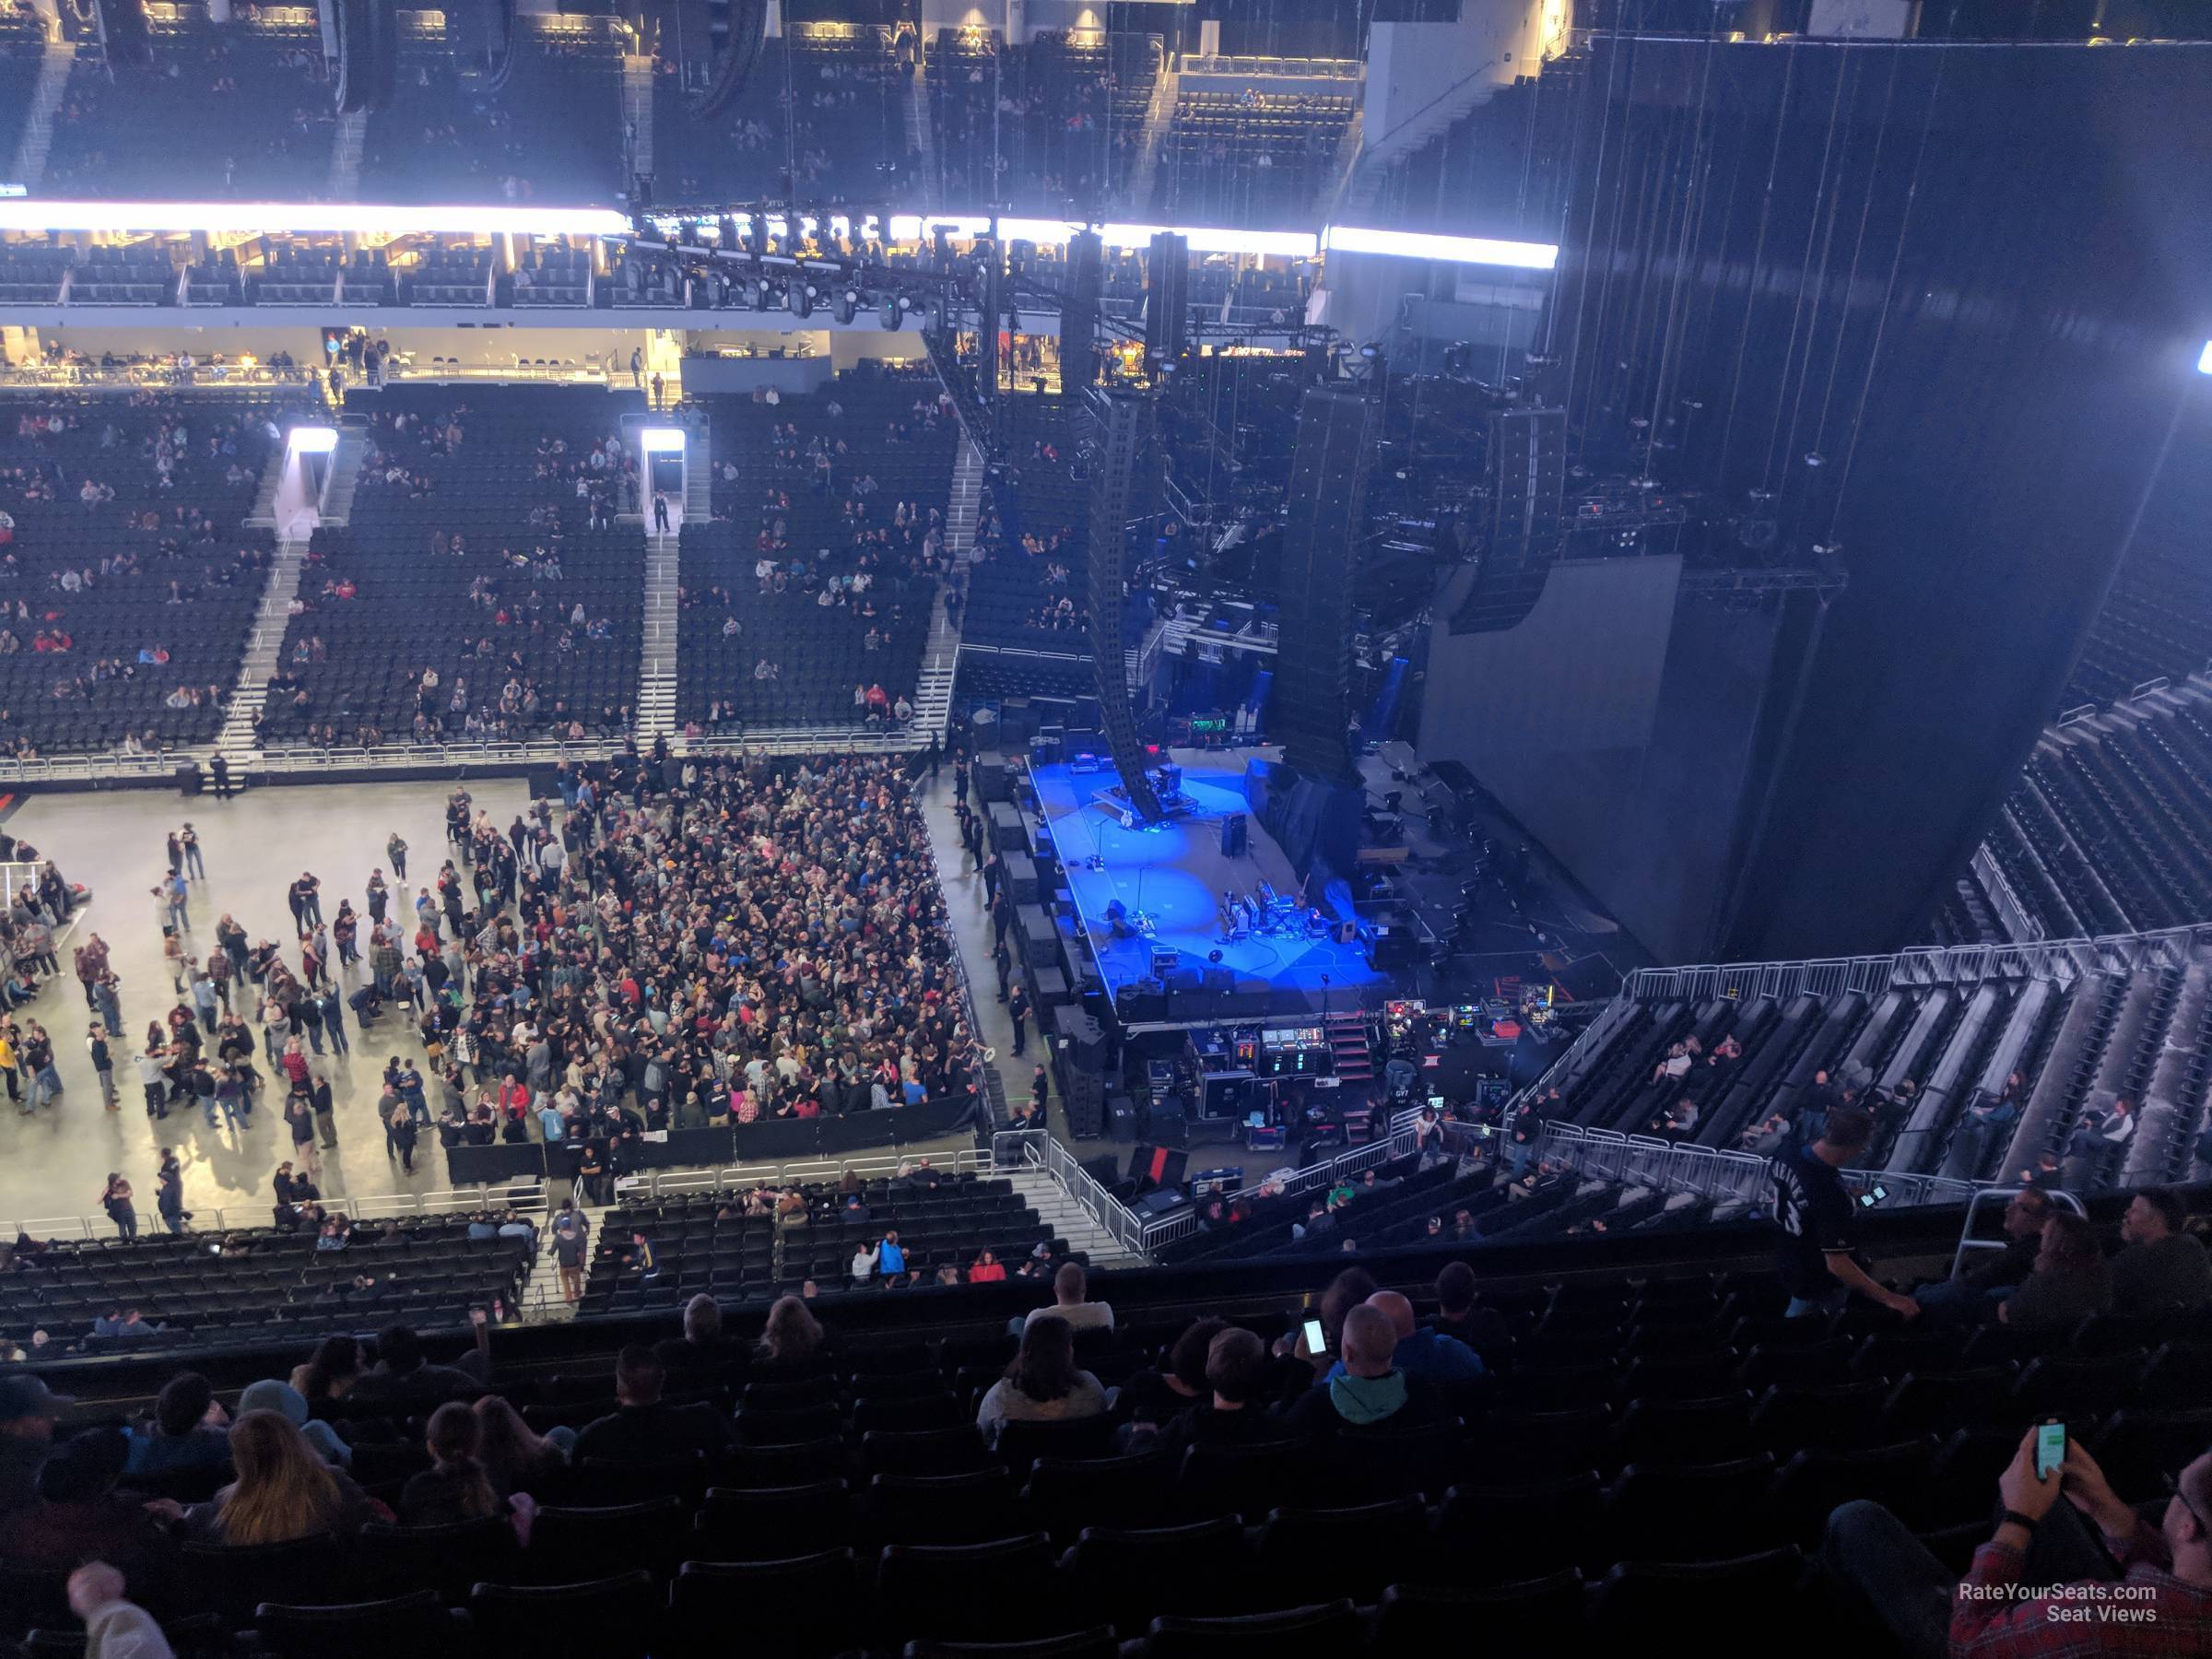 section 221, row 11 seat view  for concert - fiserv forum